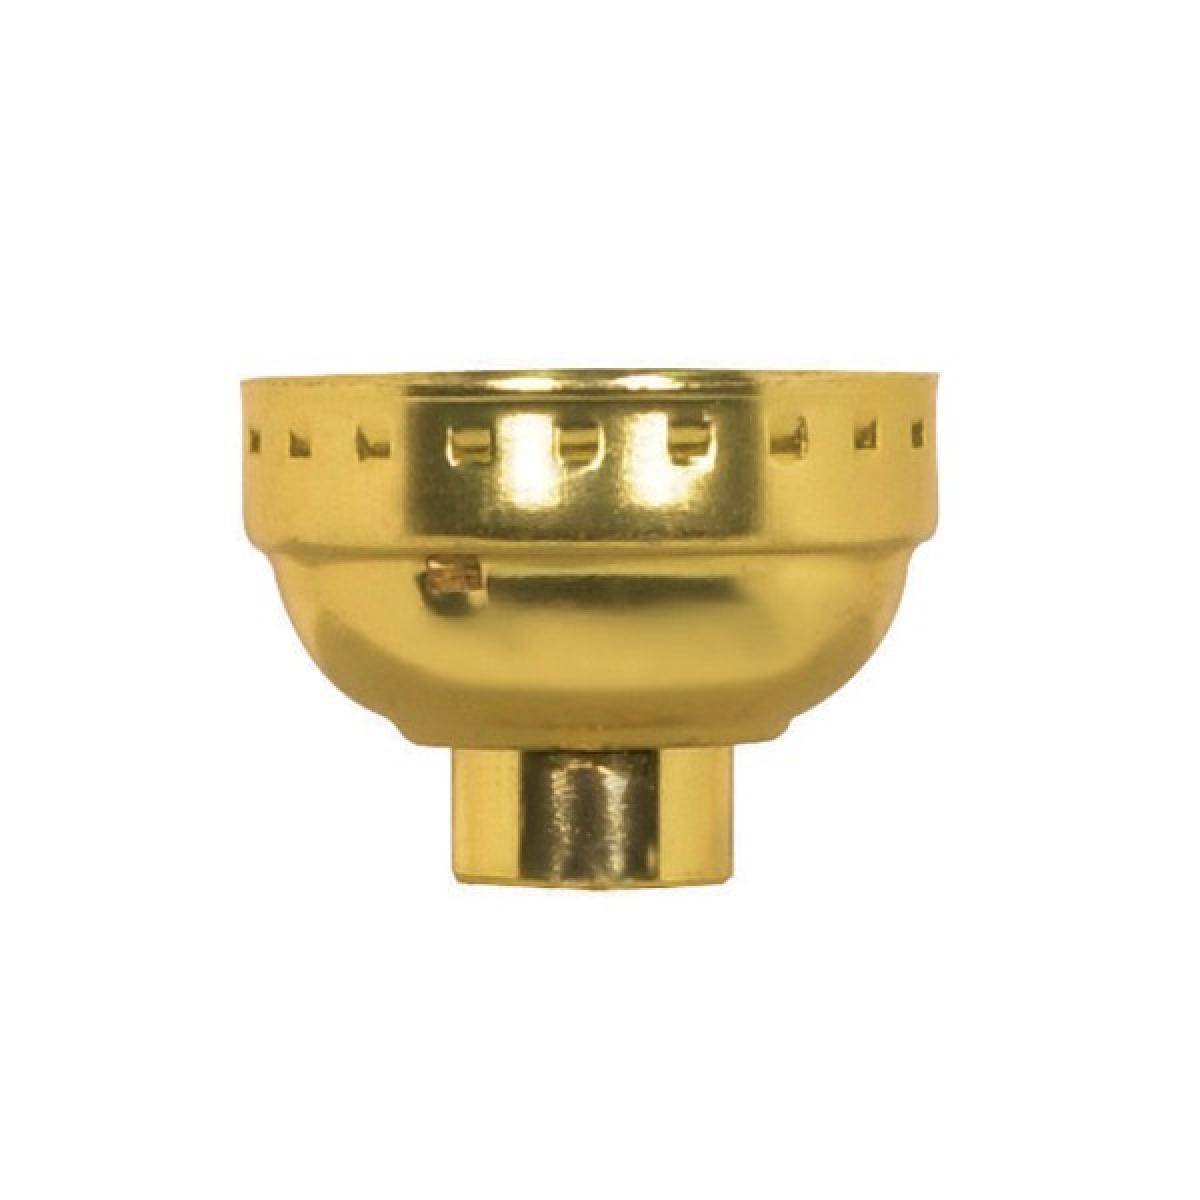 Satco 80-1350 3 Piece Solid Brass Cap With Paper Liner Polished Nickel Finish 1/8 IP Less Set Screw